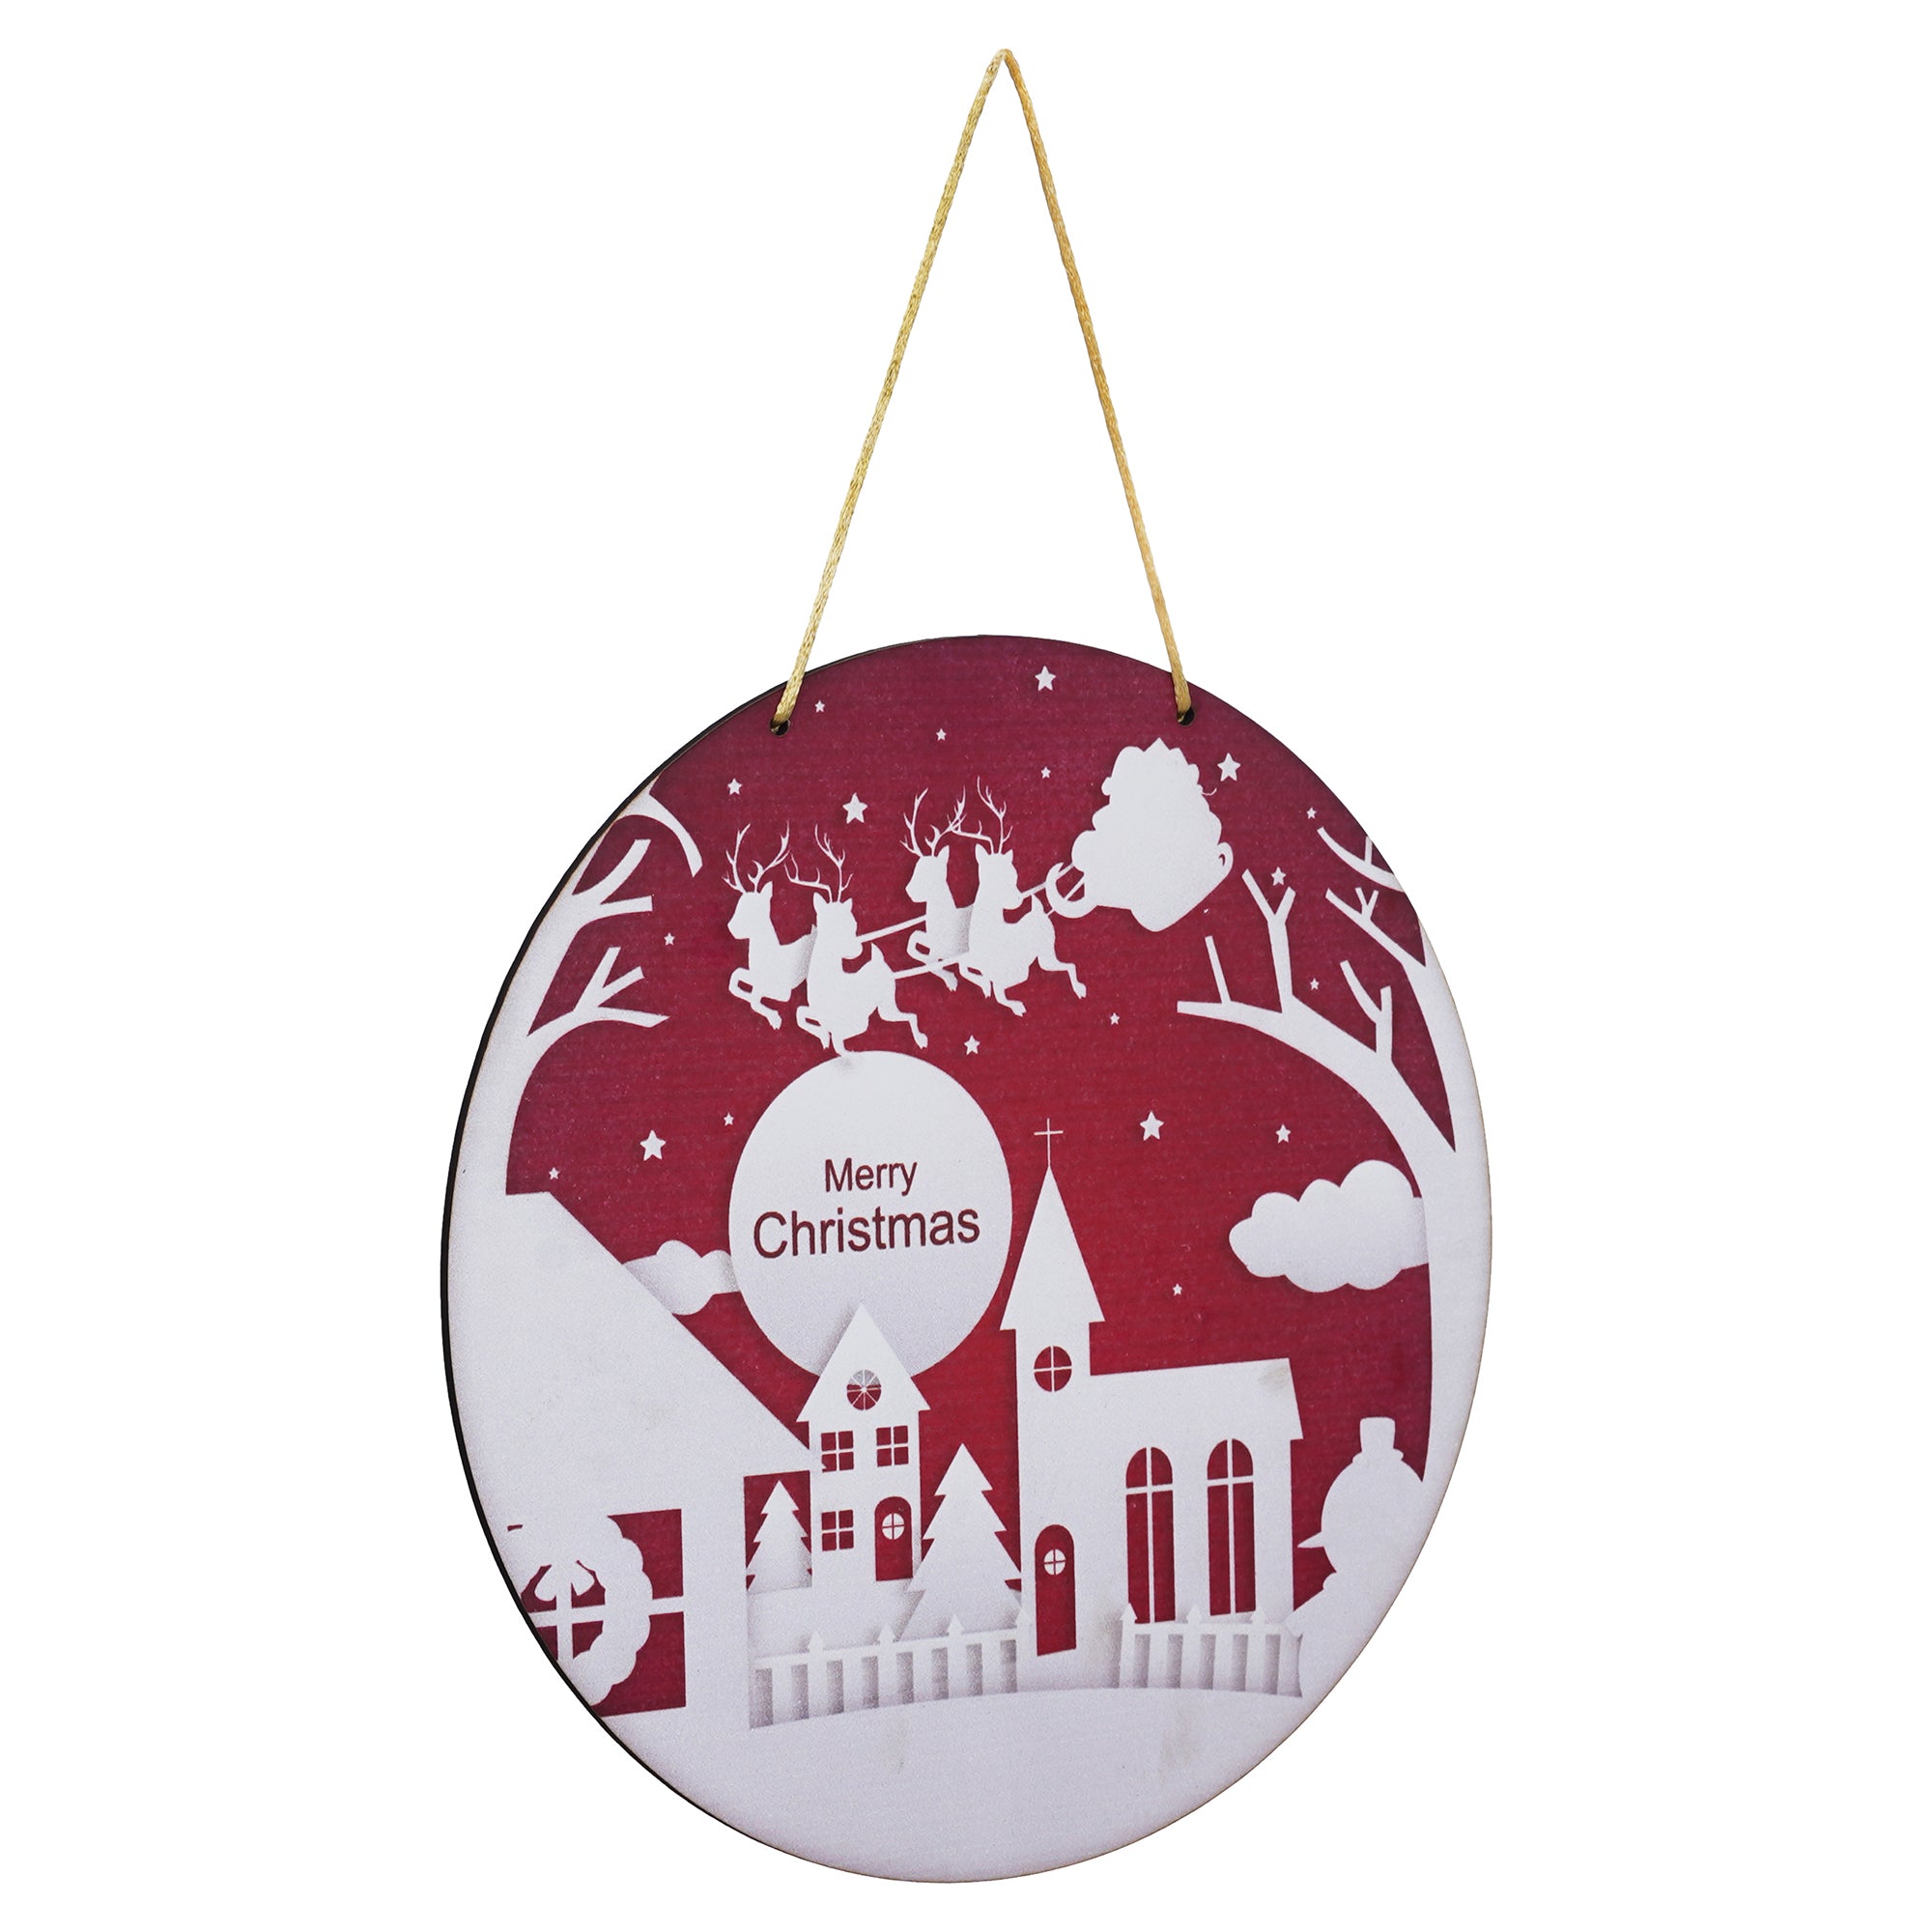 eCraftIndia Merry Christmas and Santa Claus with sleigh and reindeer Printed Door Wall Hanging for Home and Christmas Decoration (Red, White) 6